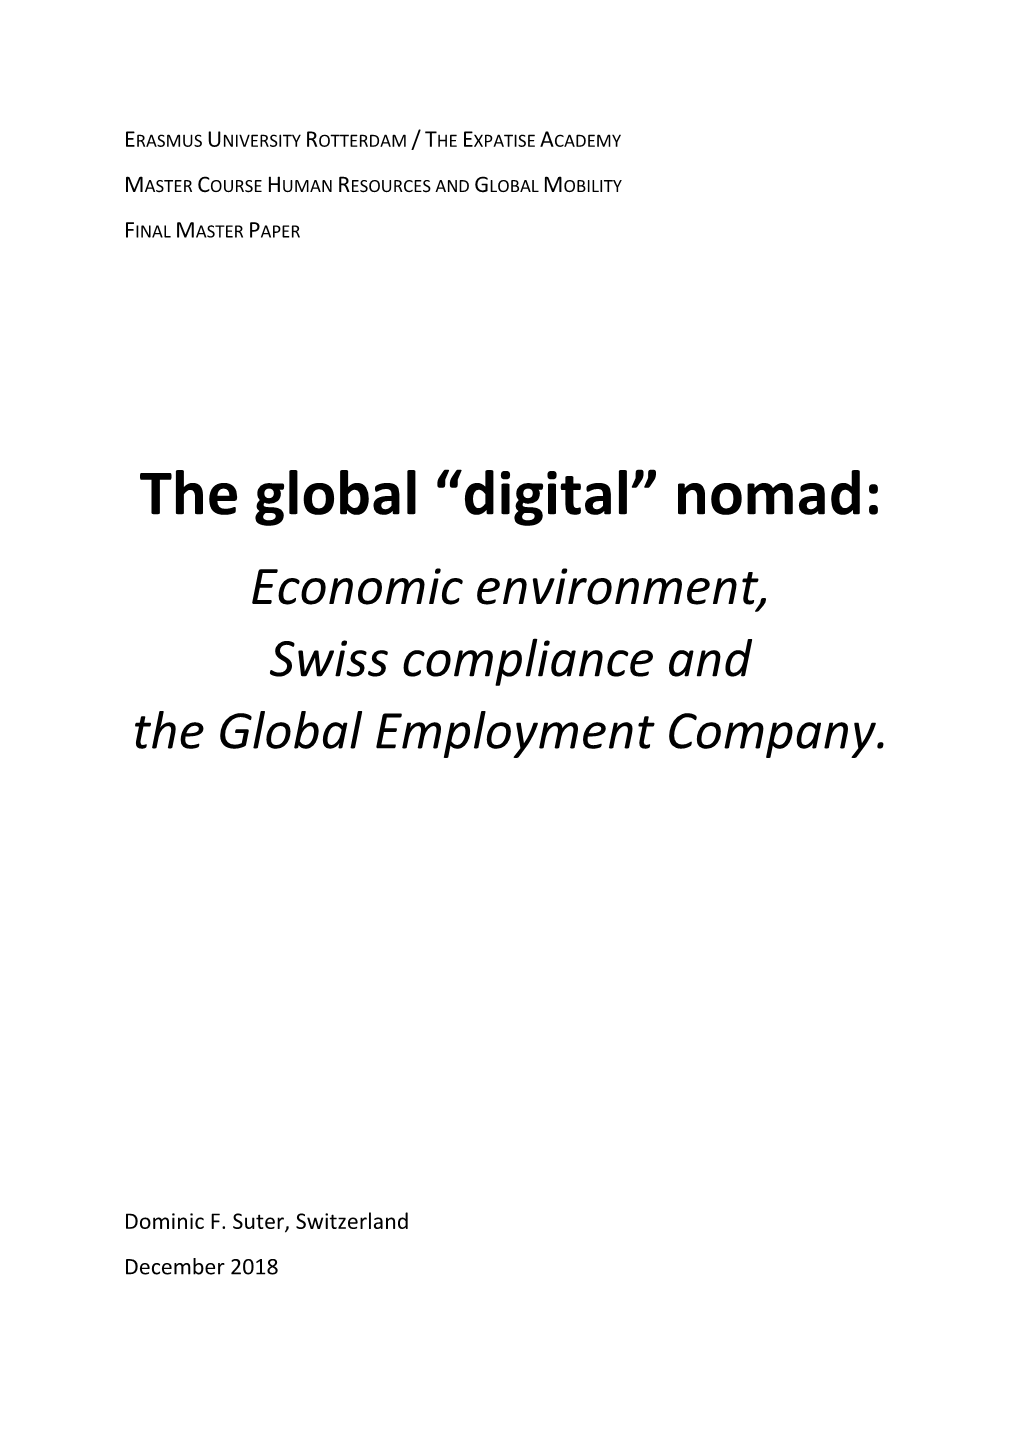 “Digital” Nomad: Economic Environment, Swiss Compliance and the Global Employment Company